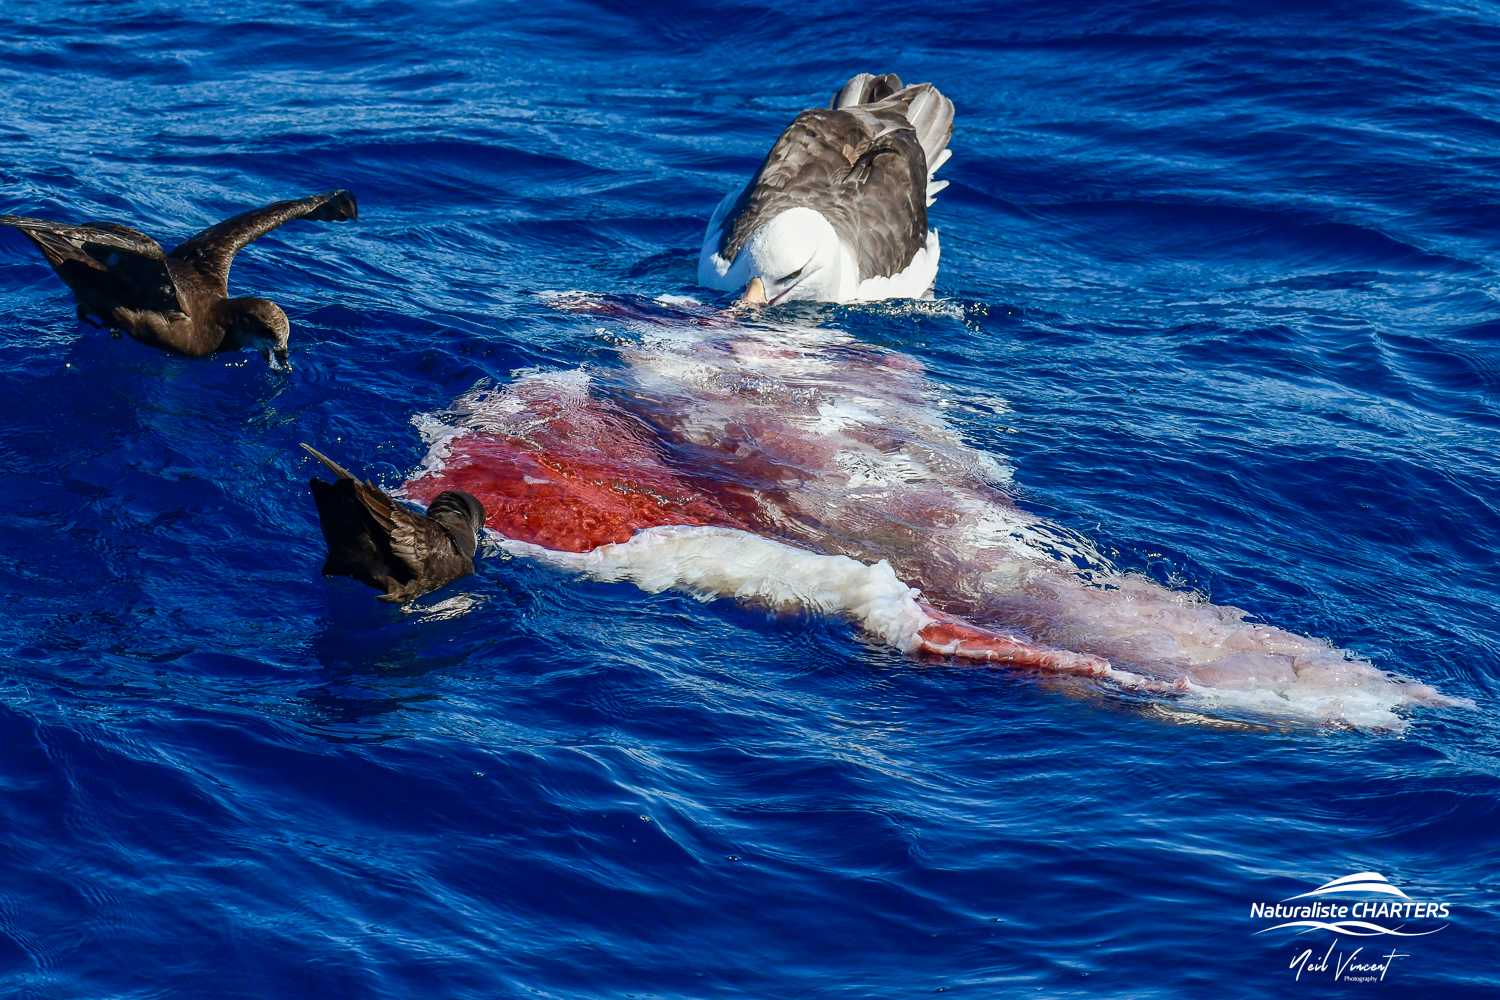 GRAPHIC WARNING: Colossal squid leftovers feasted on by pelagic birds